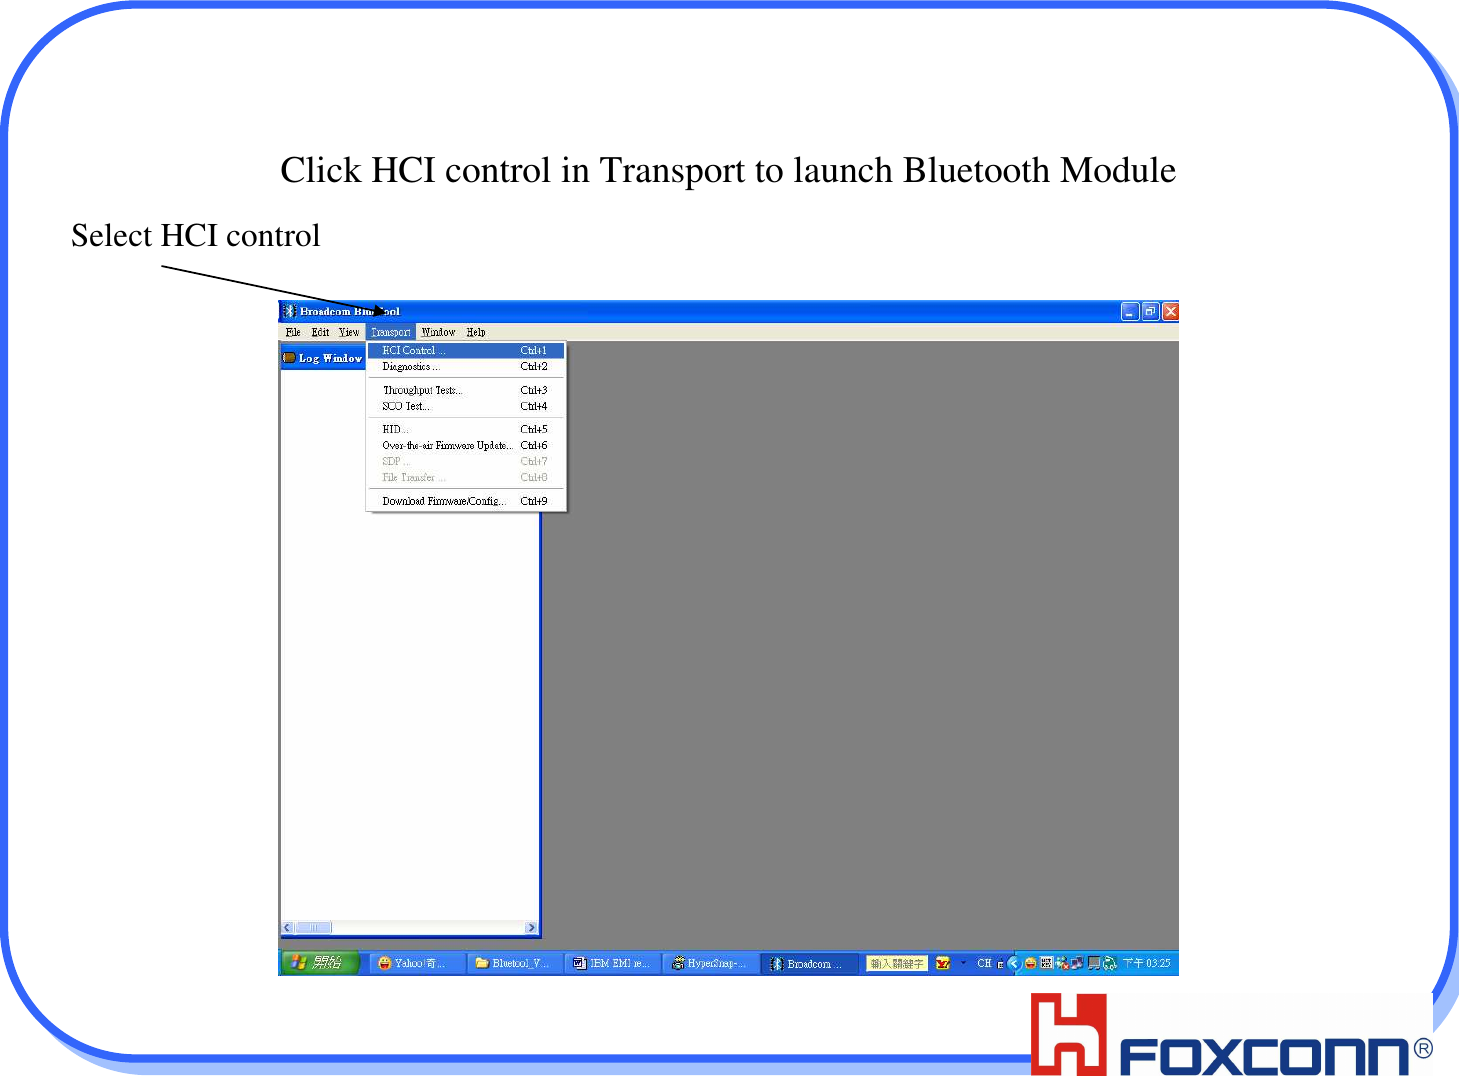 27Click HCI control in Transport to launch Bluetooth ModuleSelect HCI control 